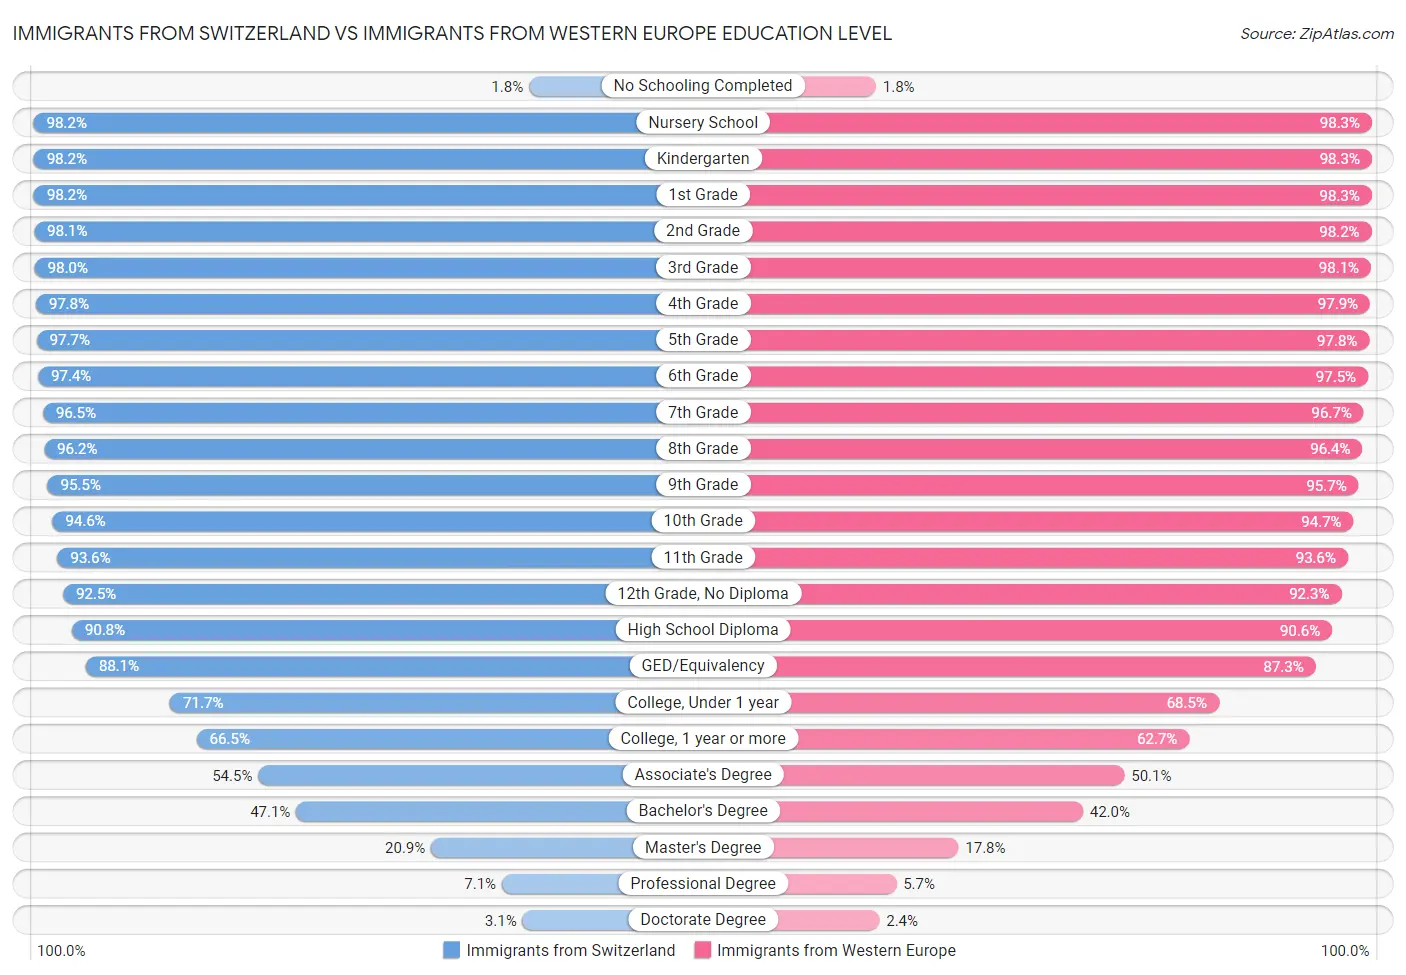 Immigrants from Switzerland vs Immigrants from Western Europe Education Level